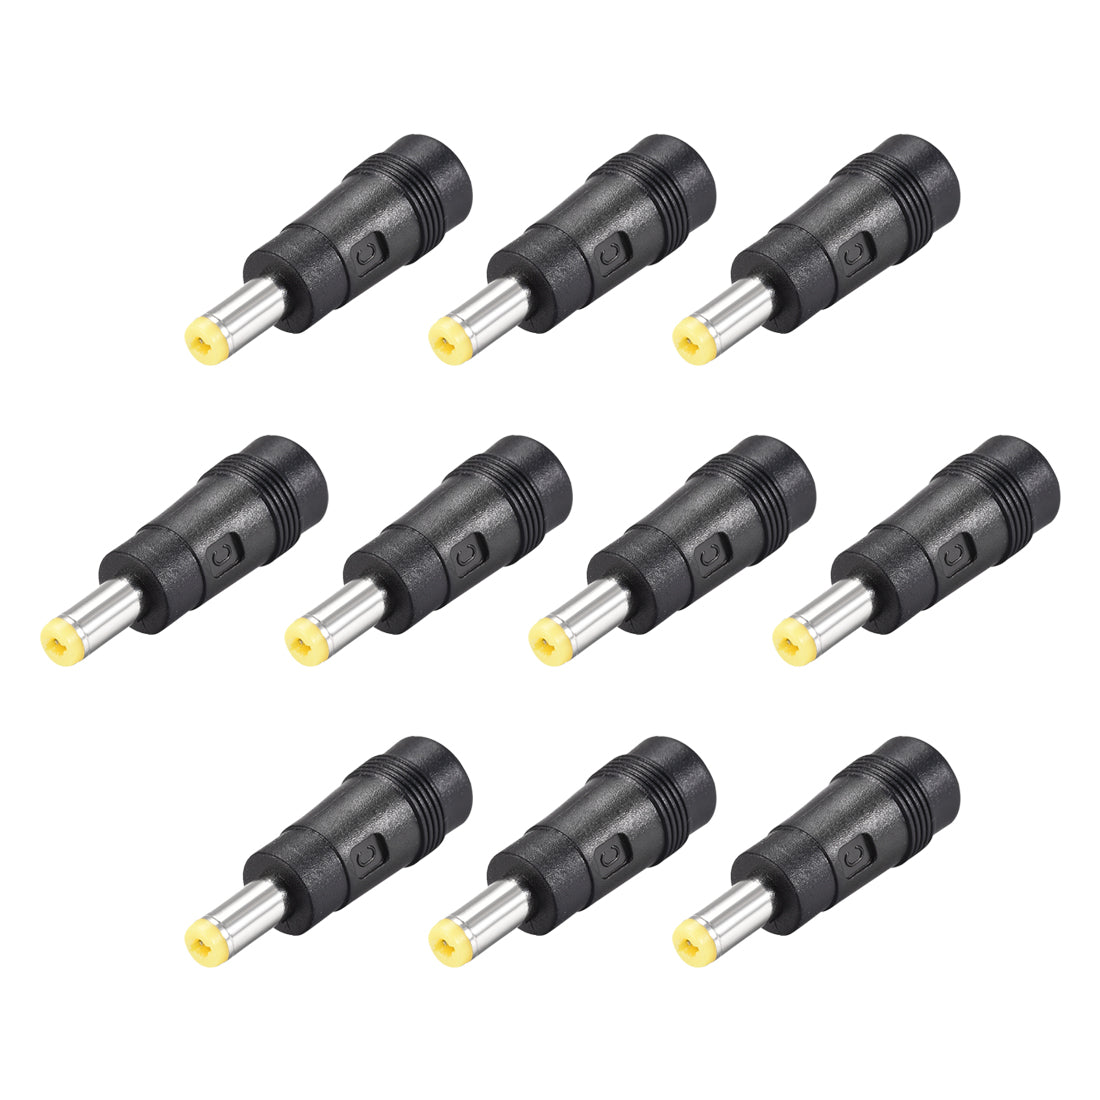 uxcell Uxcell 10Pcs DC Power Converter 5.5mm x 2.5mm Male to 5.5mm x 2.1mm Female Connector